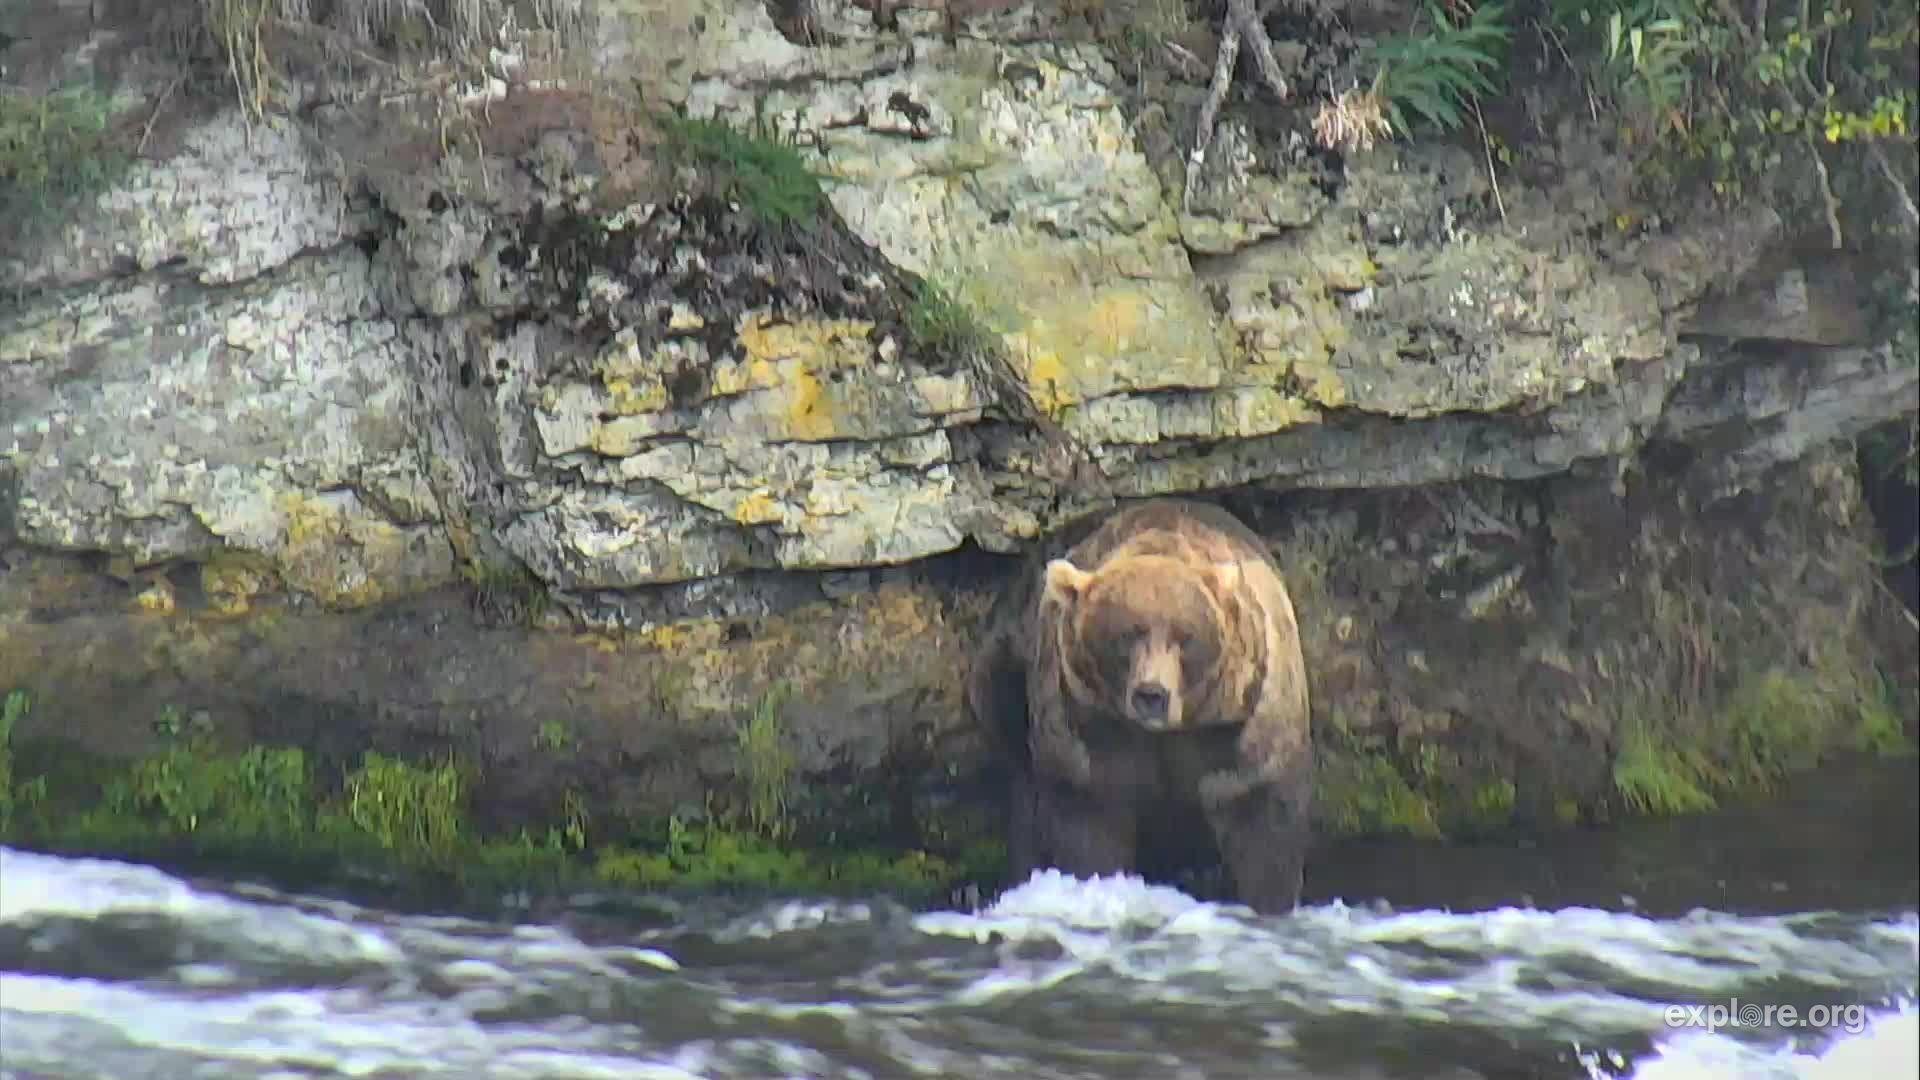 I'm watching #bearcam on explore.org, streaming live from Katmai